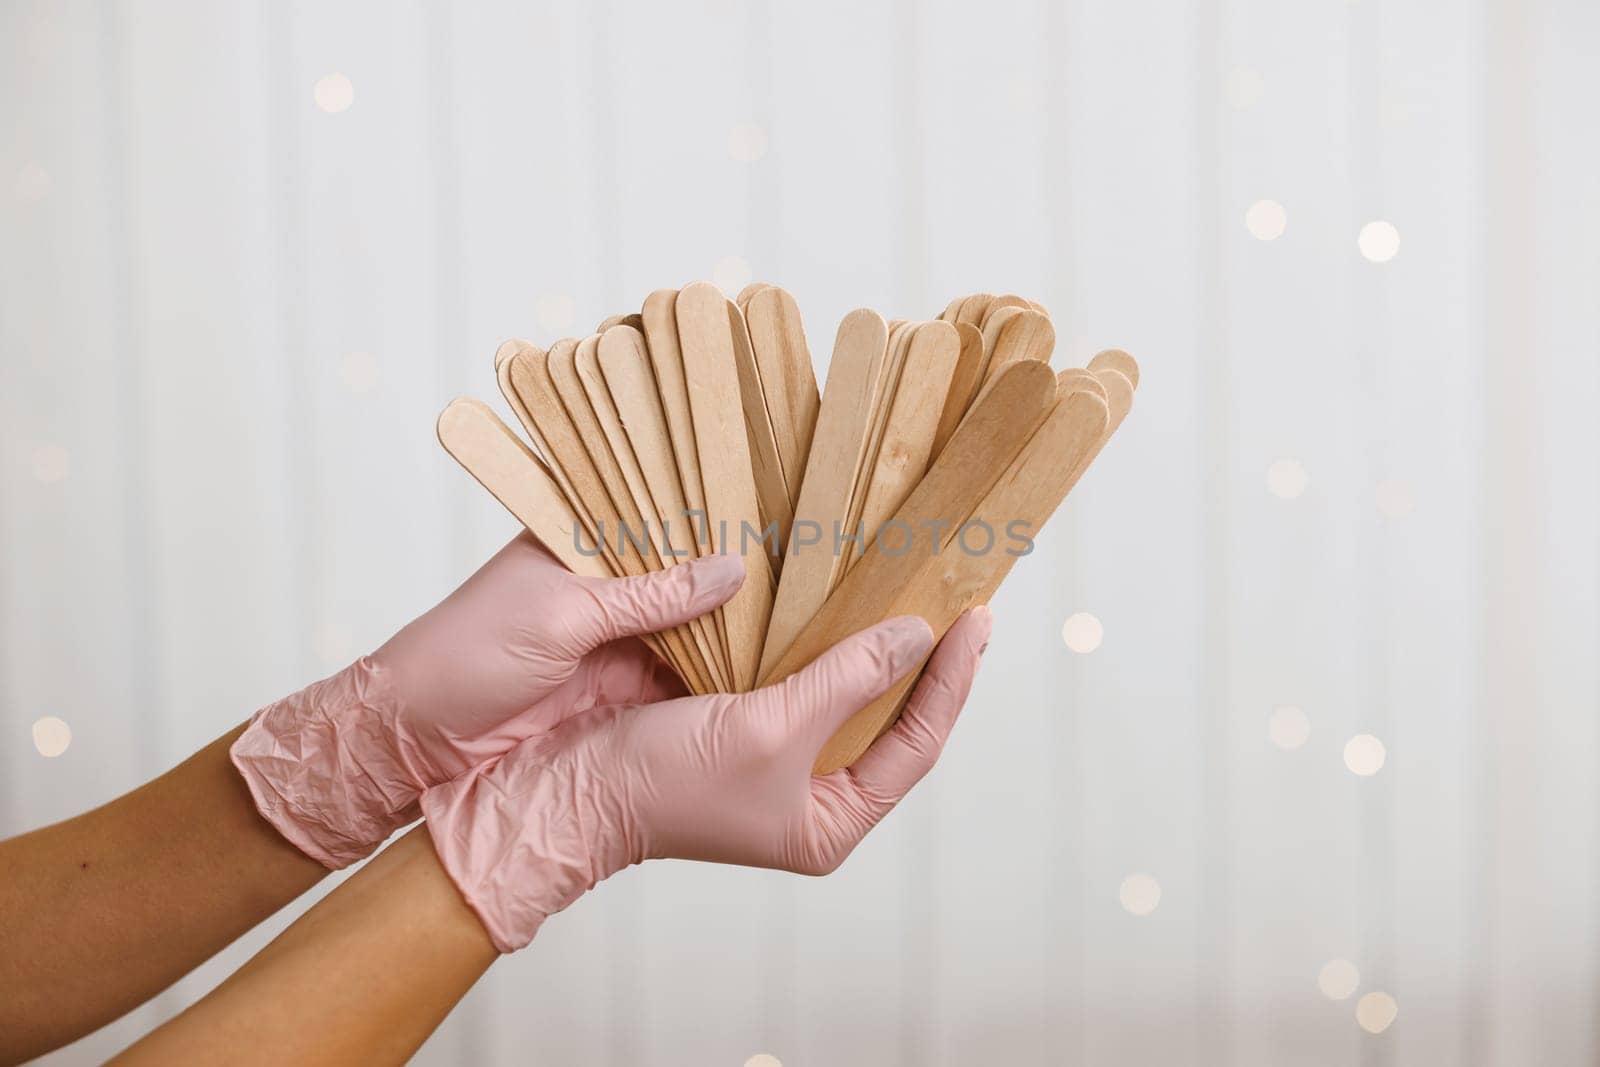 Woman holding many wax wooden spatulas. The young woman is wearing beige clothing and in pink medical gloves. The concept of beauty, depilation, waxing, sugaring smooth skin without hair, banner